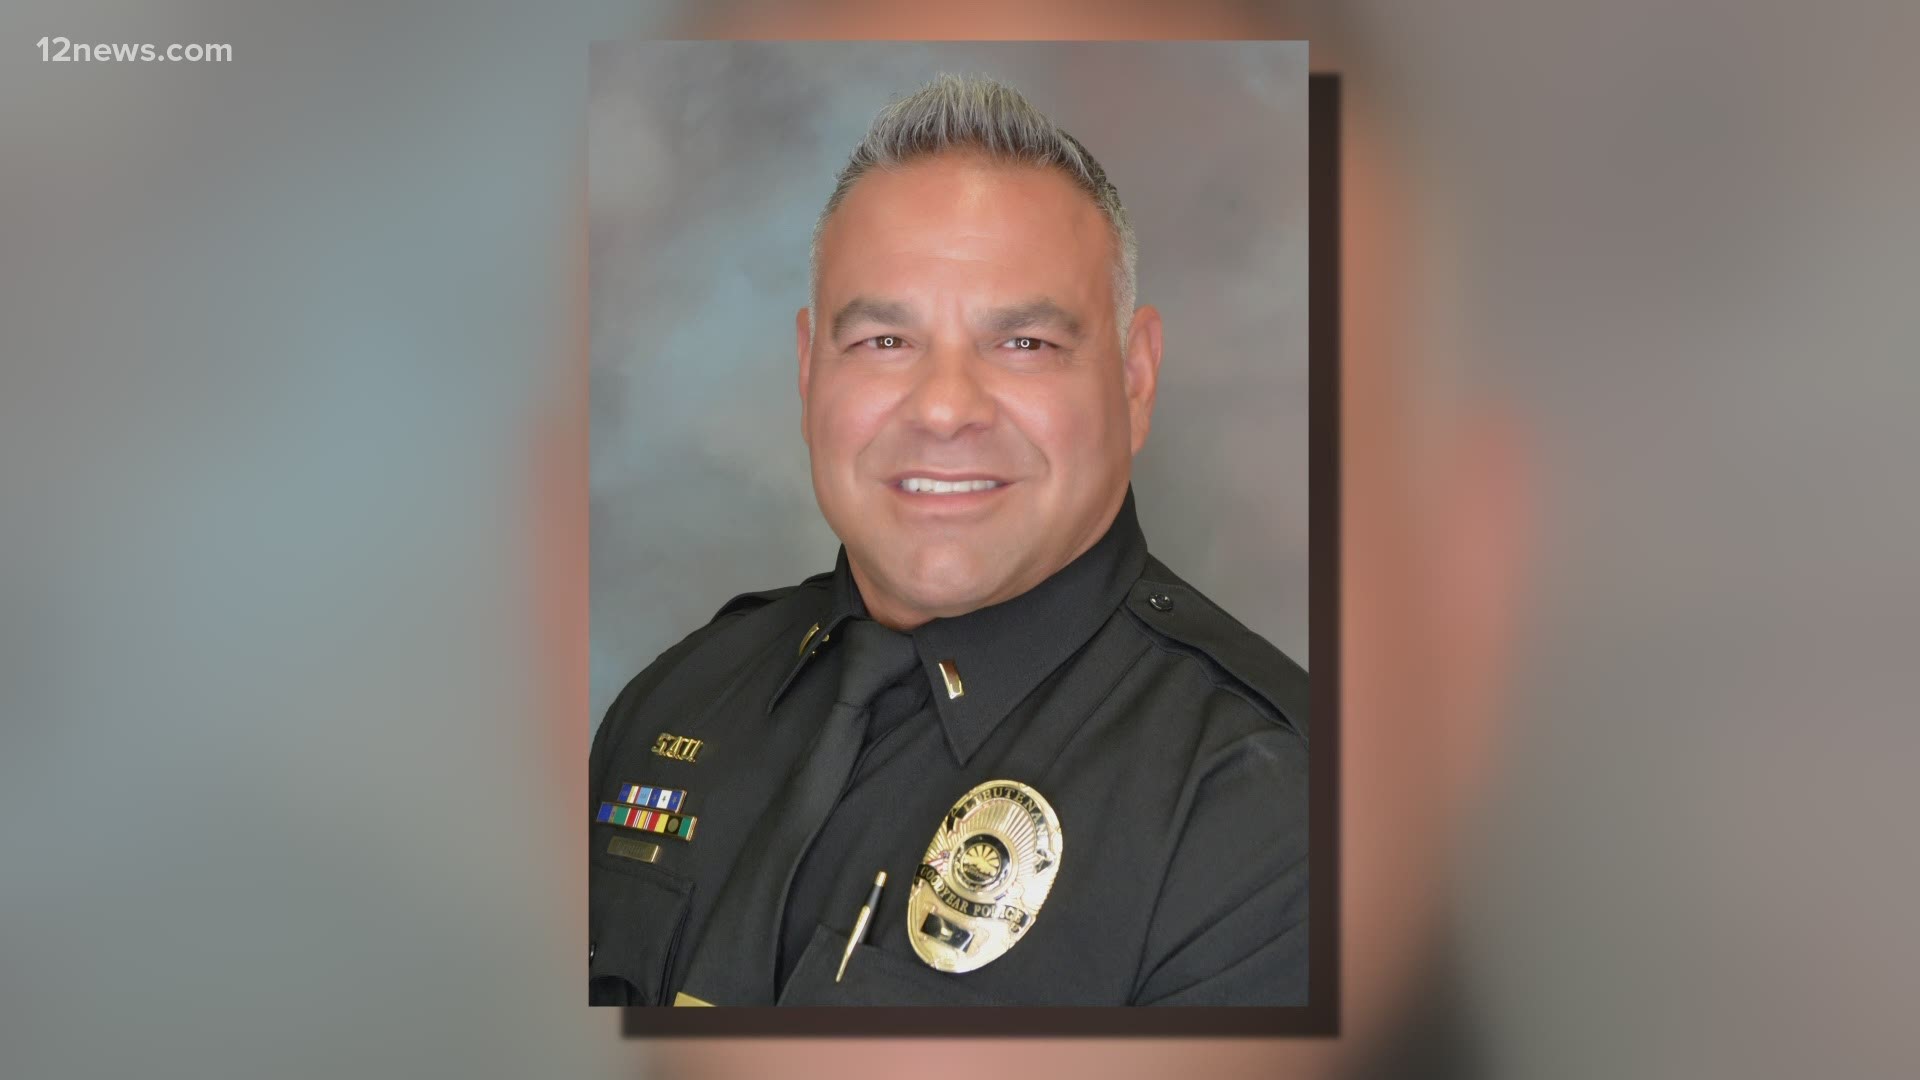 Goodyear Police Lt. Joe Pacello was in charge of Internal Affairs Investigations at the department. Pacello had a history of disciplinary problems and was fired.